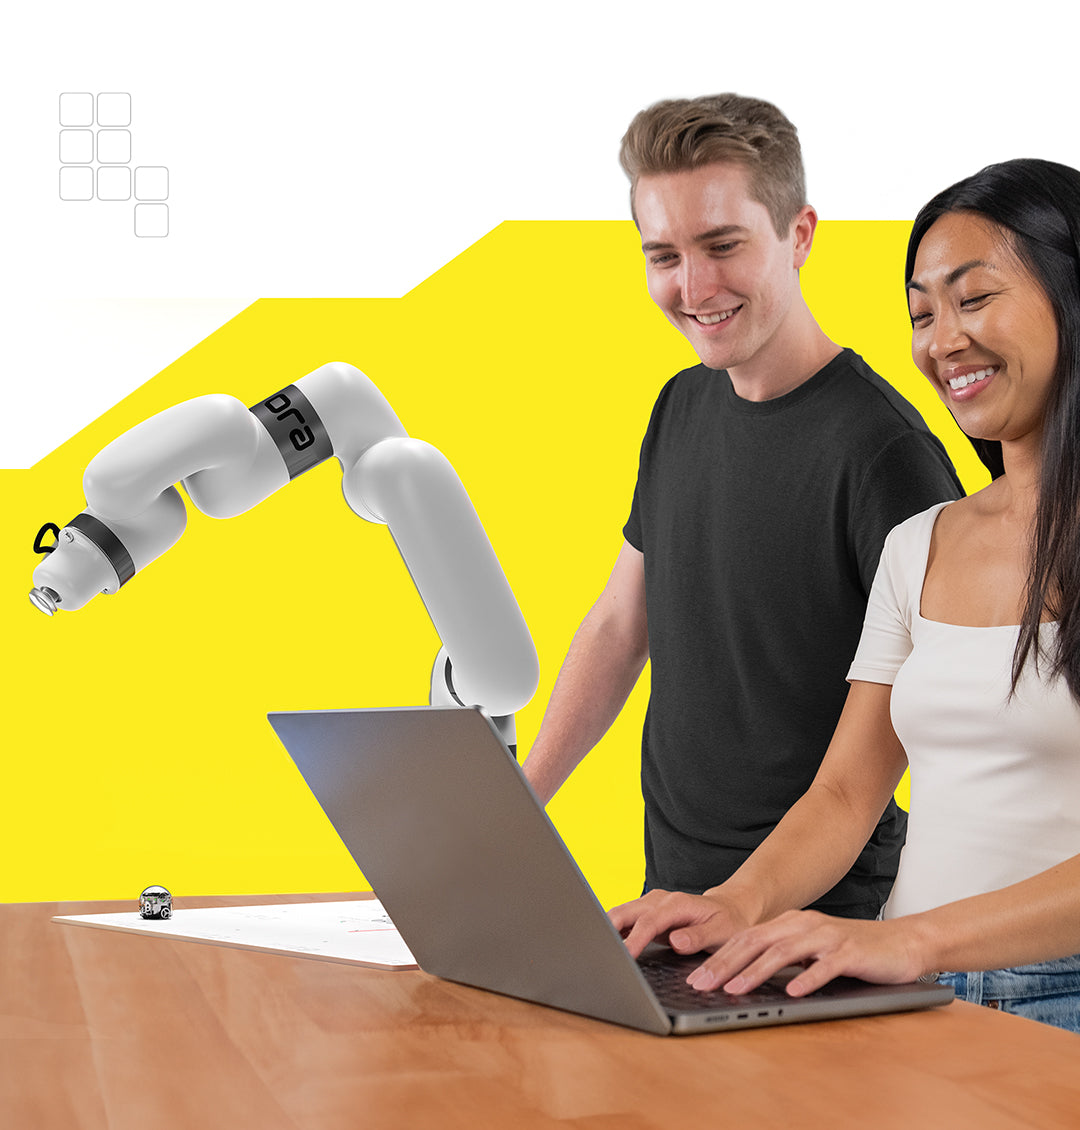 ORA Ozobot Robotic Arm collaborative robot cobot - best programmable robots for beginners